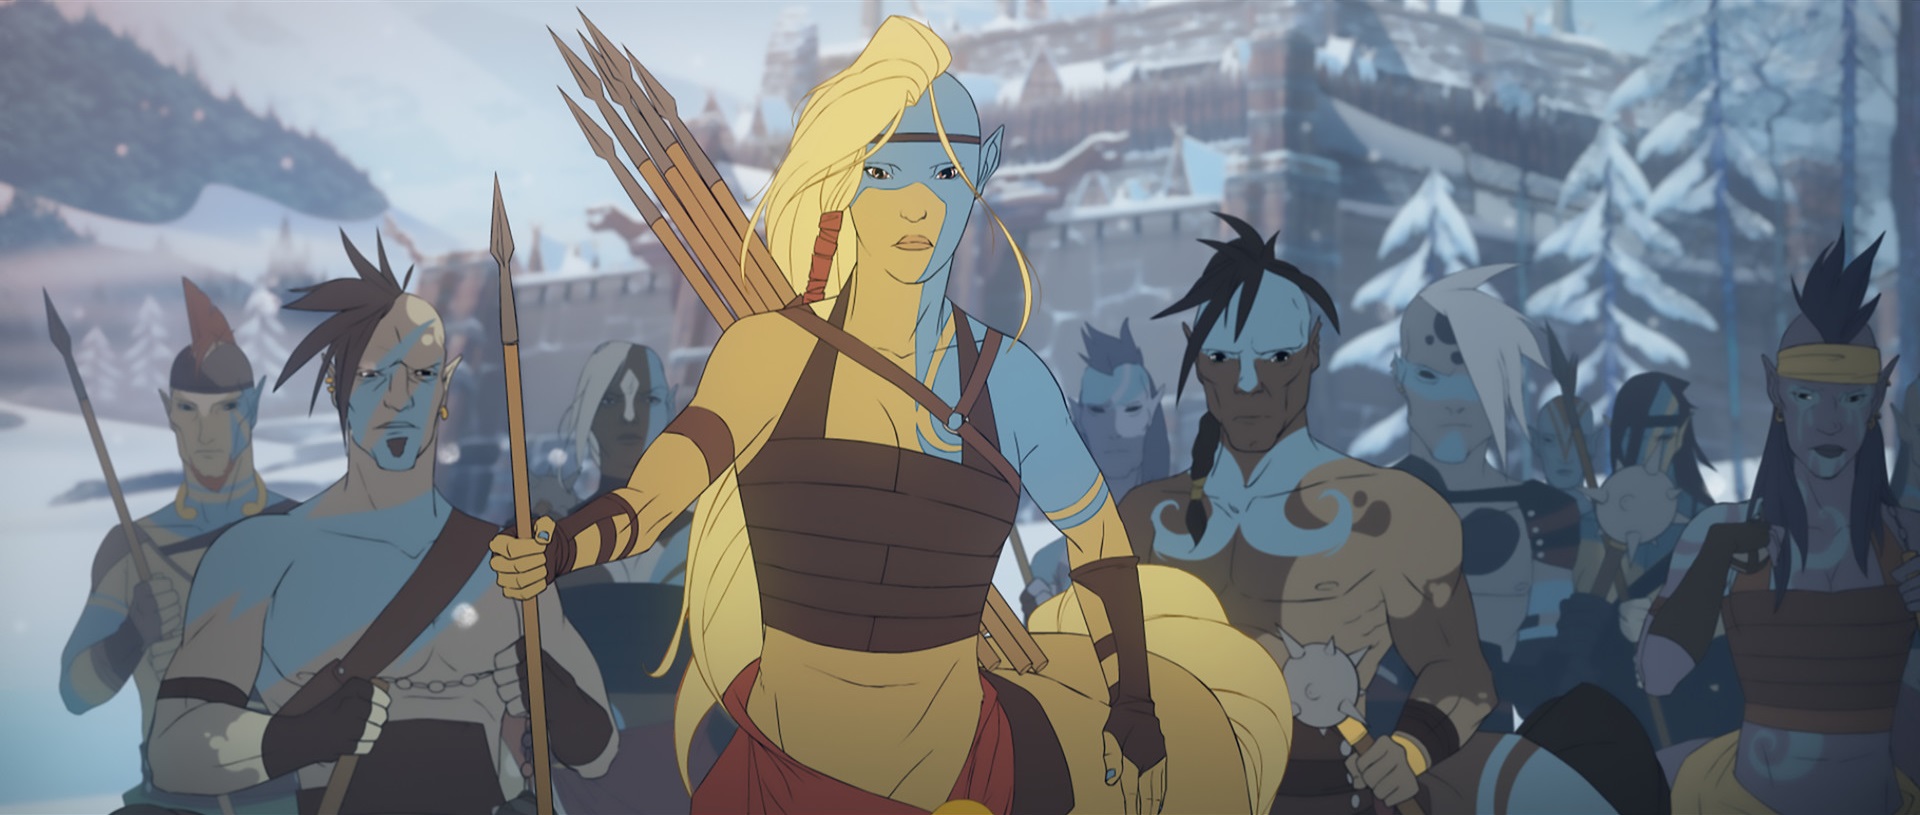 The Banner Saga 2 Arrives on Steam, Console Versions Arriving Later